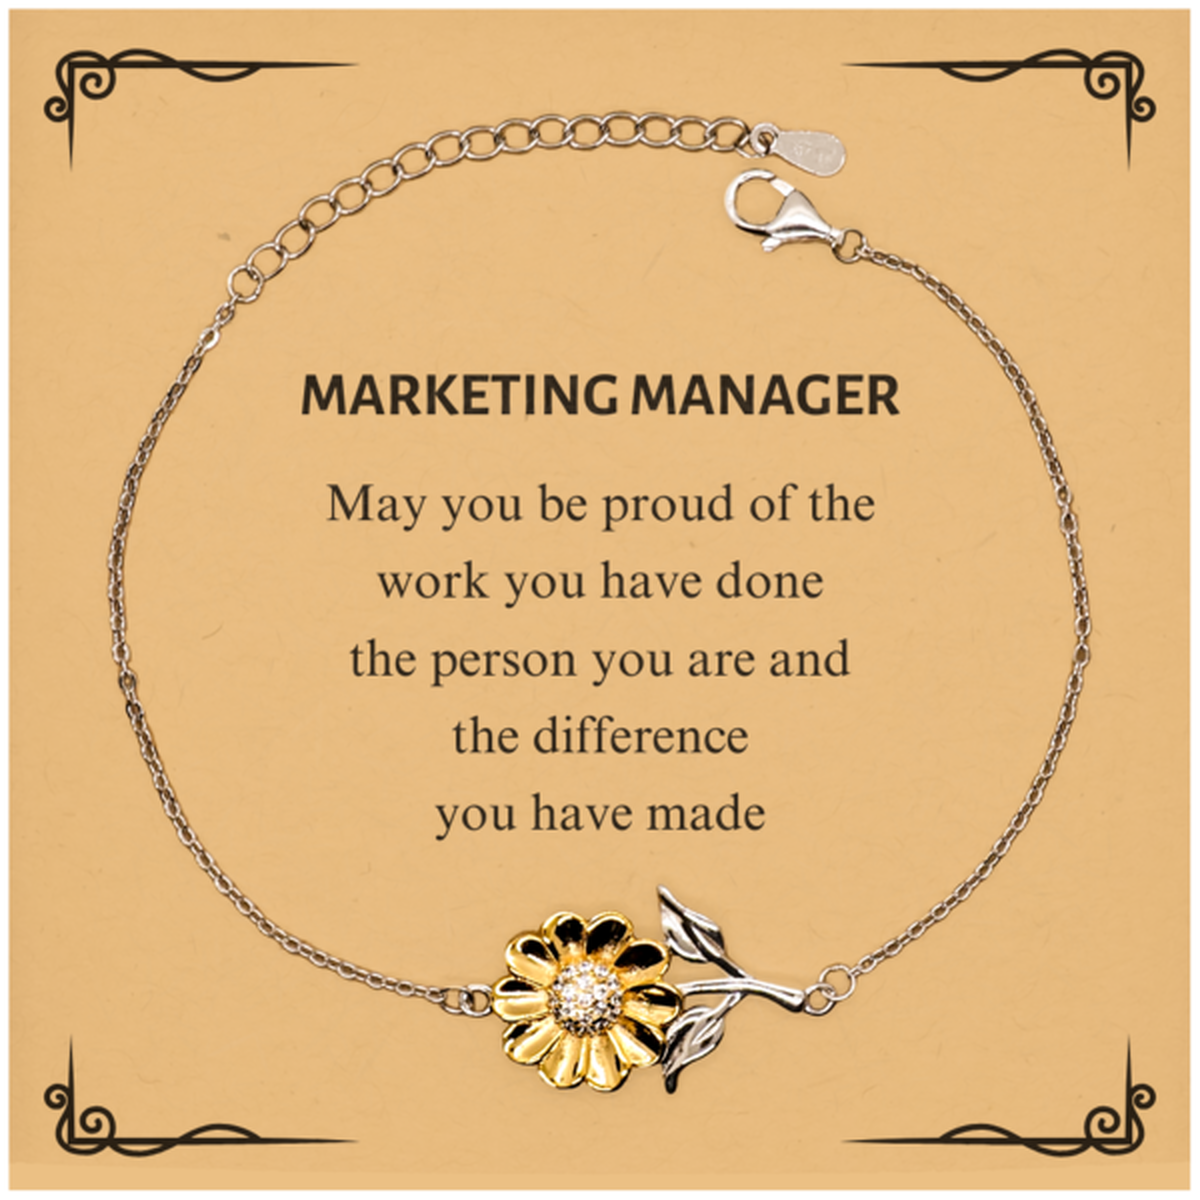 Marketing Manager May you be proud of the work you have done, Retirement Marketing Manager Sunflower Bracelet for Colleague Appreciation Gifts Amazing for Marketing Manager